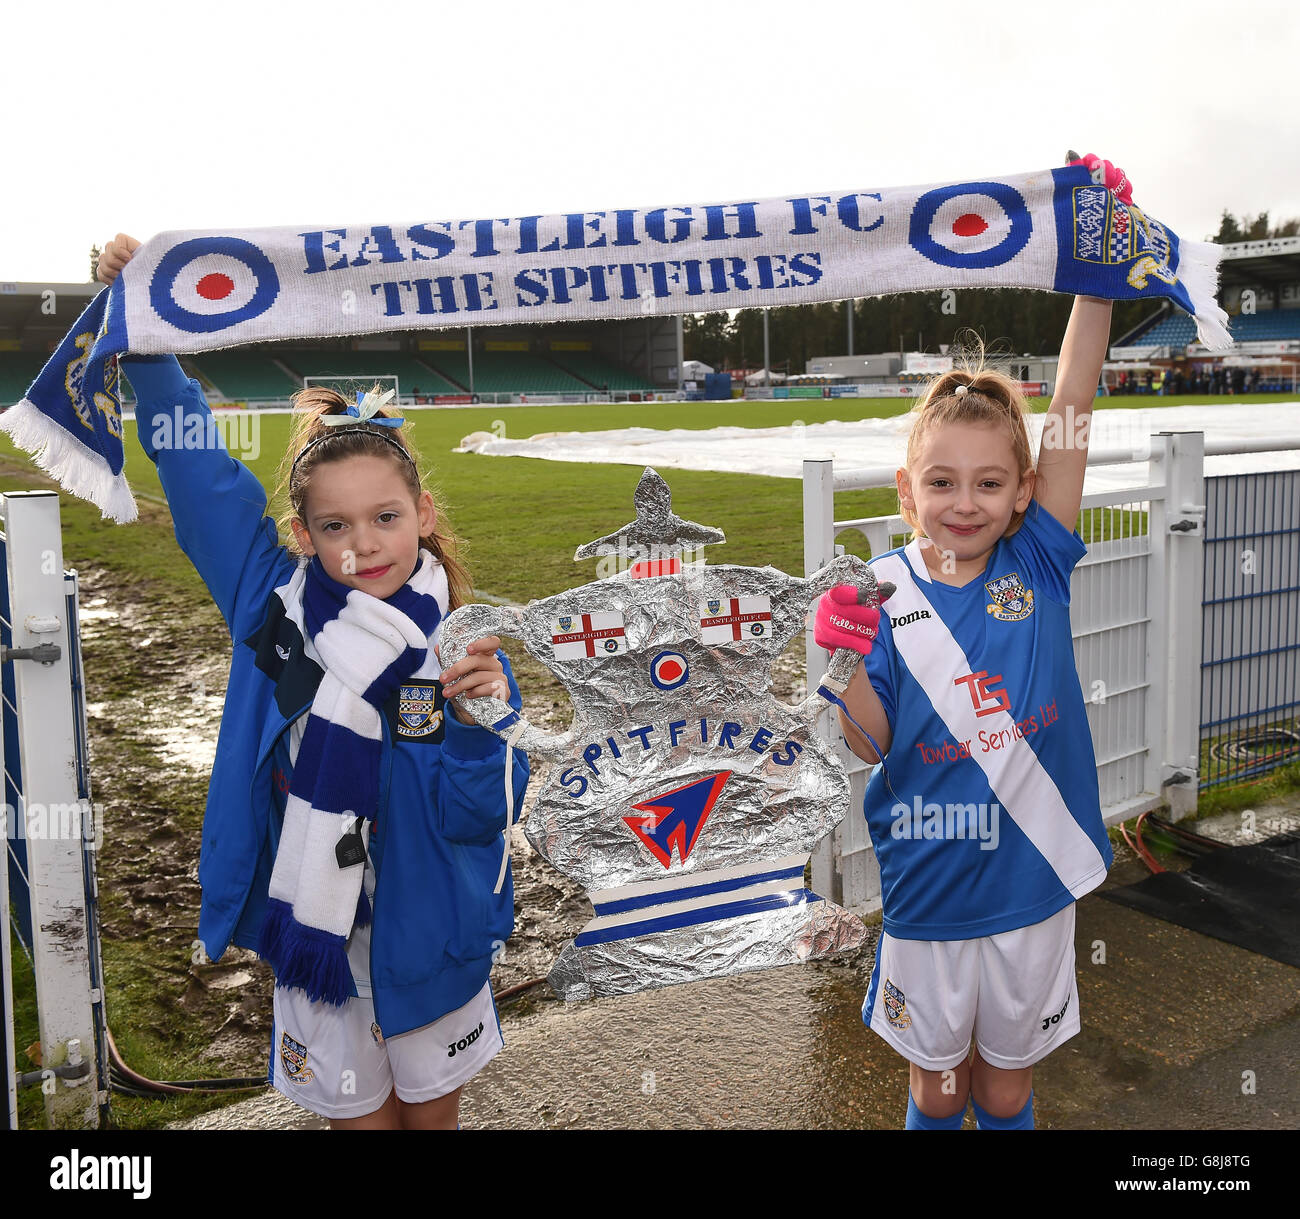 The two mascots Scarlette Perrin (left) and Brooke Bassingham prior to the Emirates FA Cup, third round game at the Silverlake Stadium, Eastleigh. Stock Photo